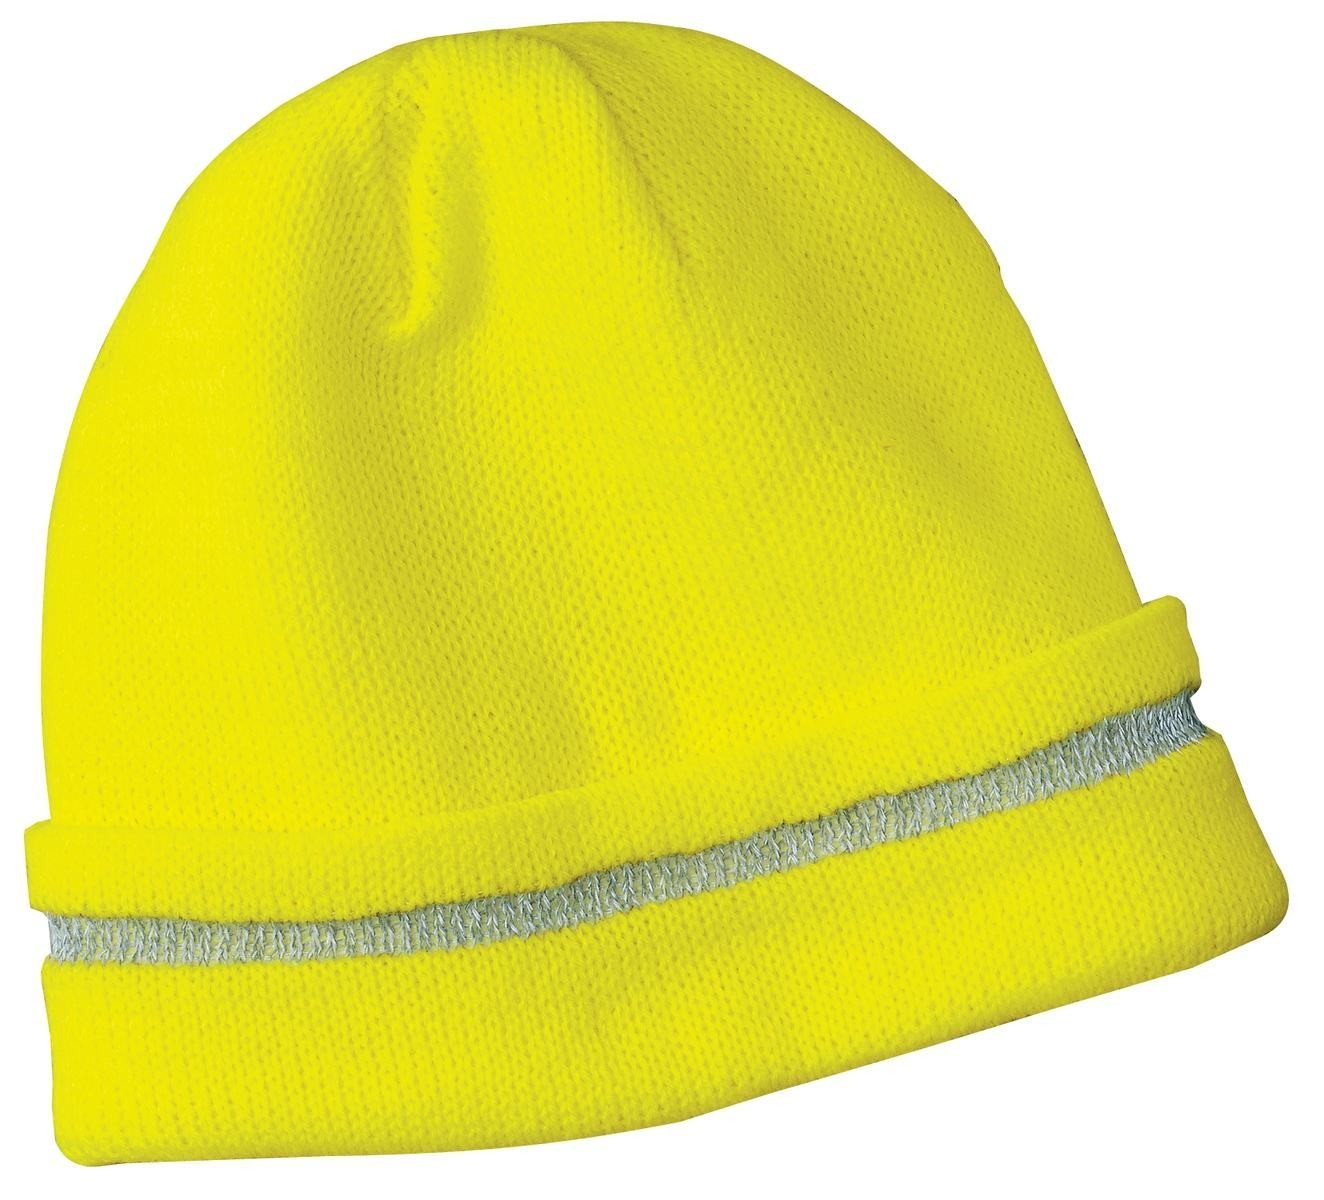 Safety Yellow / Reflective